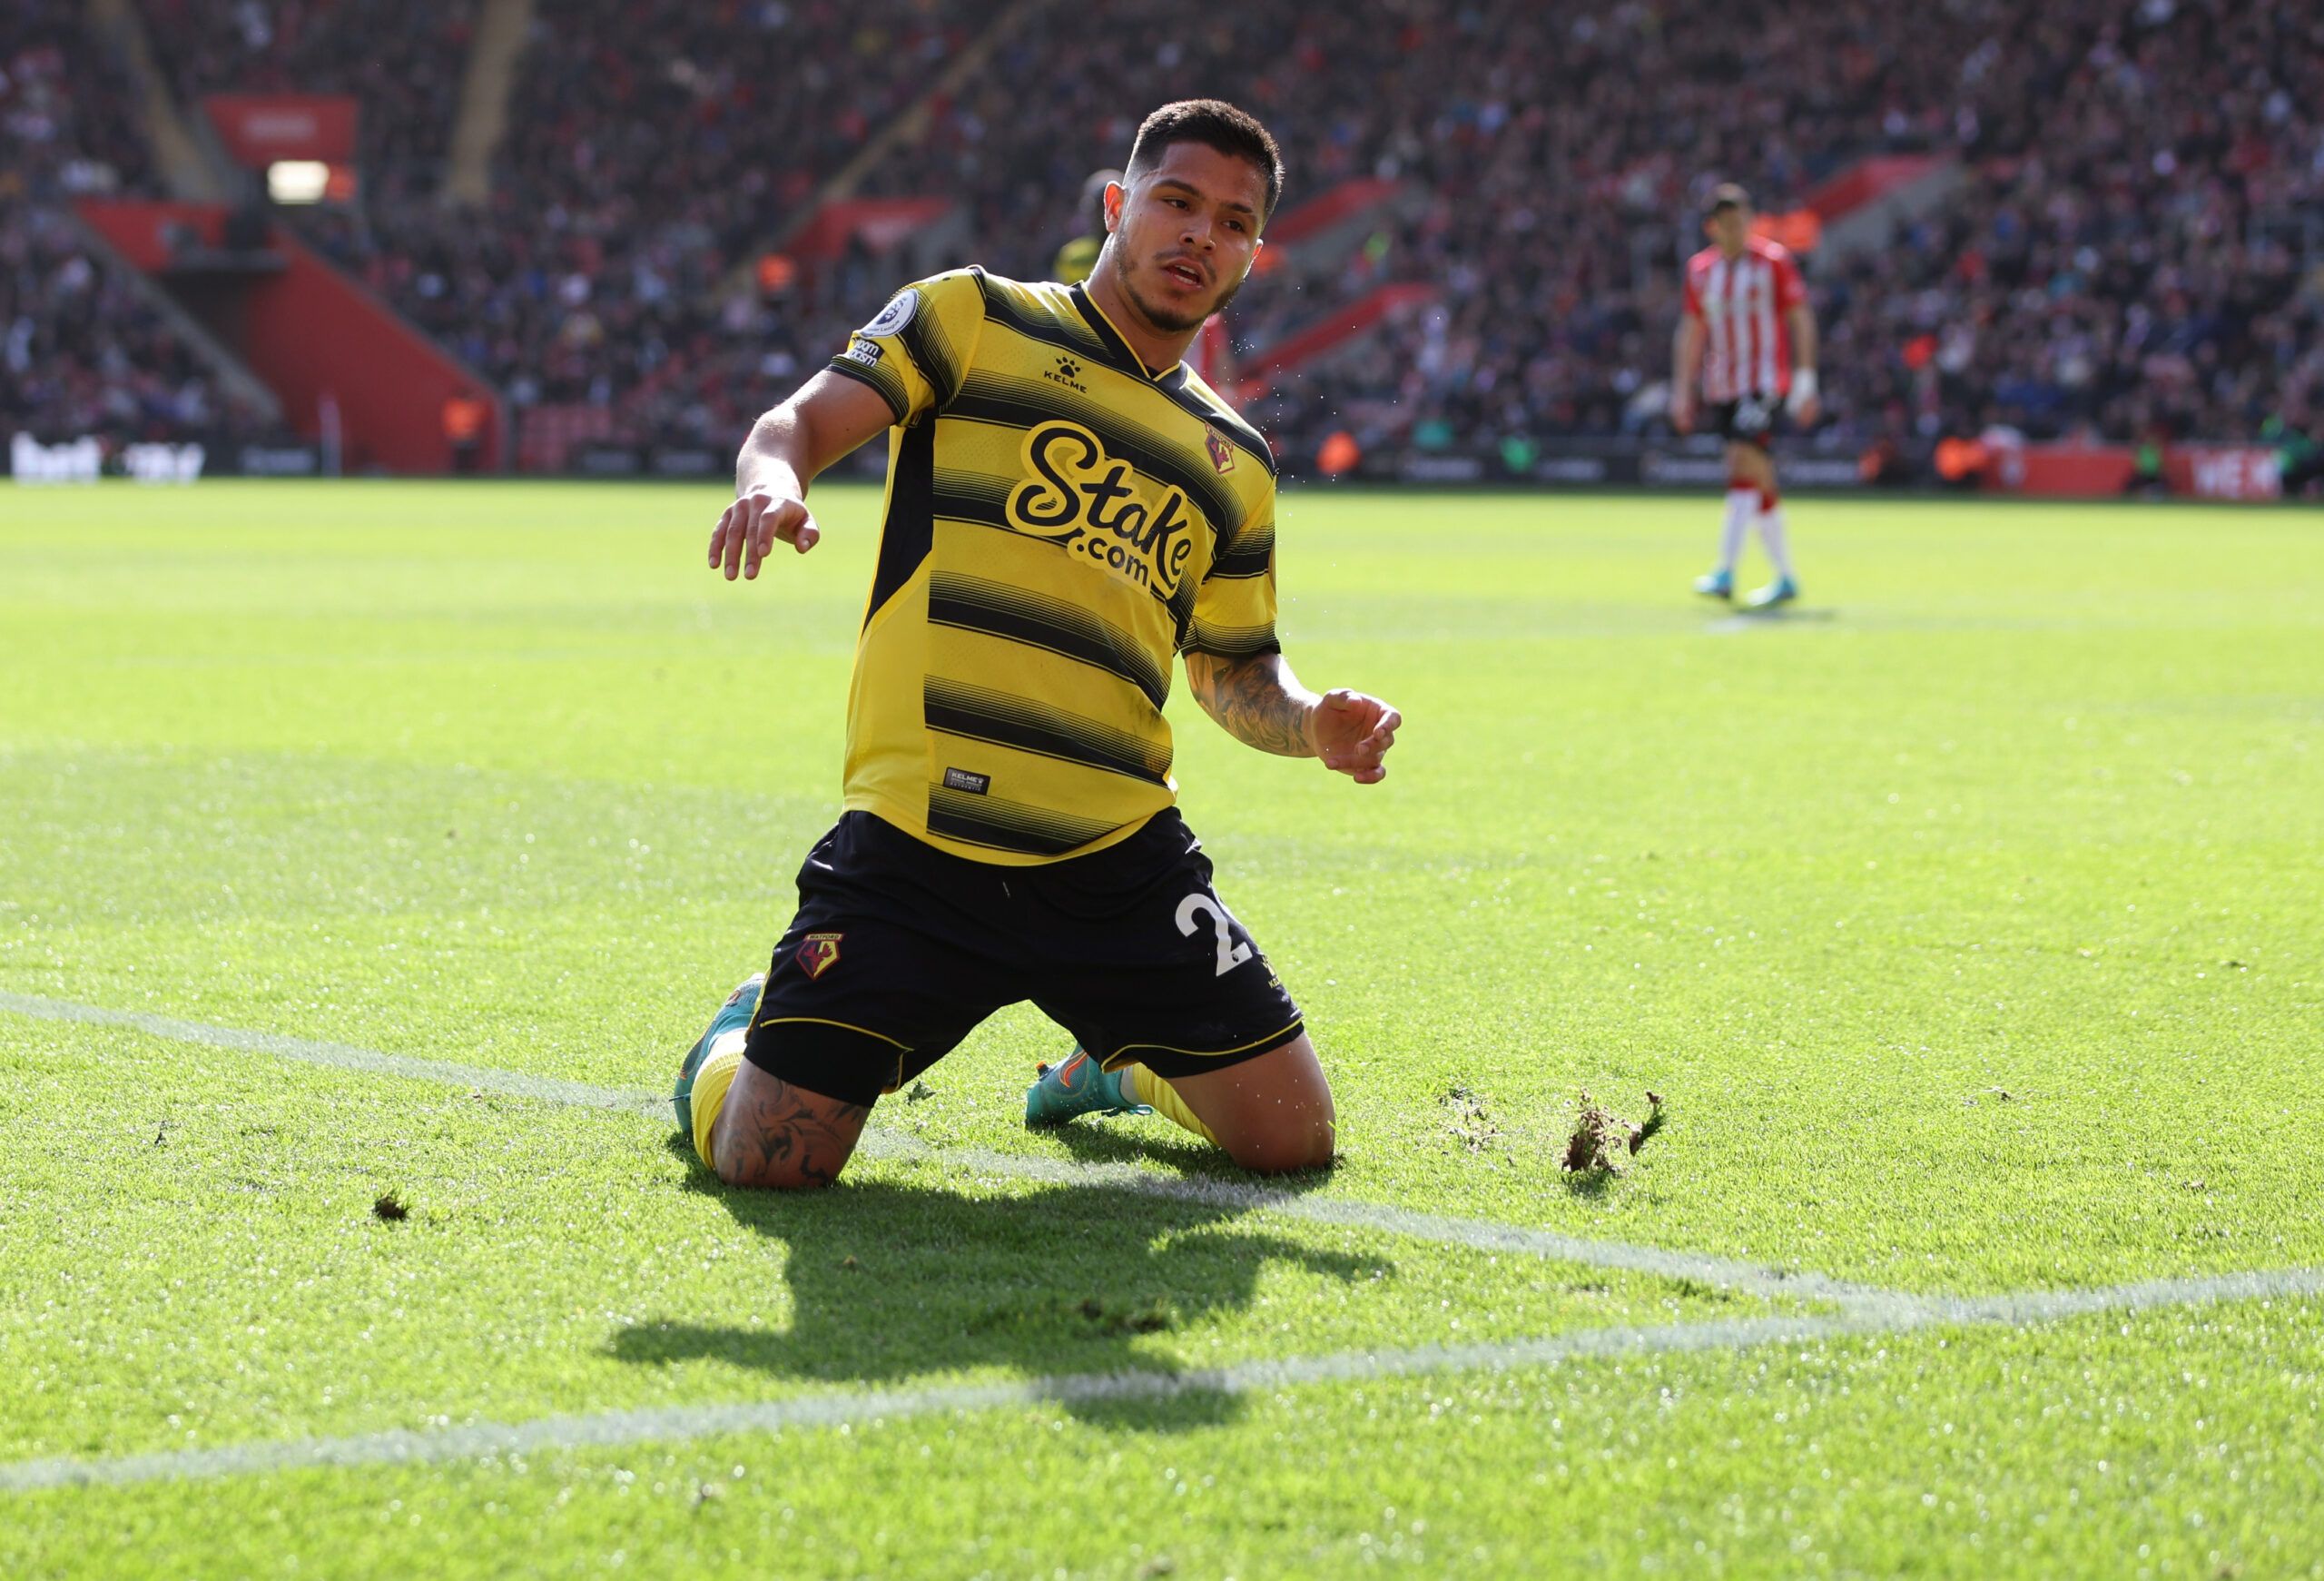 Soccer Football - Premier League - Southampton v Watford - St Mary's Stadium, Southampton, Britain - March 13, 2022 Watford's Cucho Hernandez celebrates scoring their second goal Action Images via Reuters/Paul Childs EDITORIAL USE ONLY. No use with unauthorized audio, video, data, fixture lists, club/league logos or 'live' services. Online in-match use limited to 75 images, no video emulation. No use in betting, games or single club /league/player publications.  Please contact your account repre